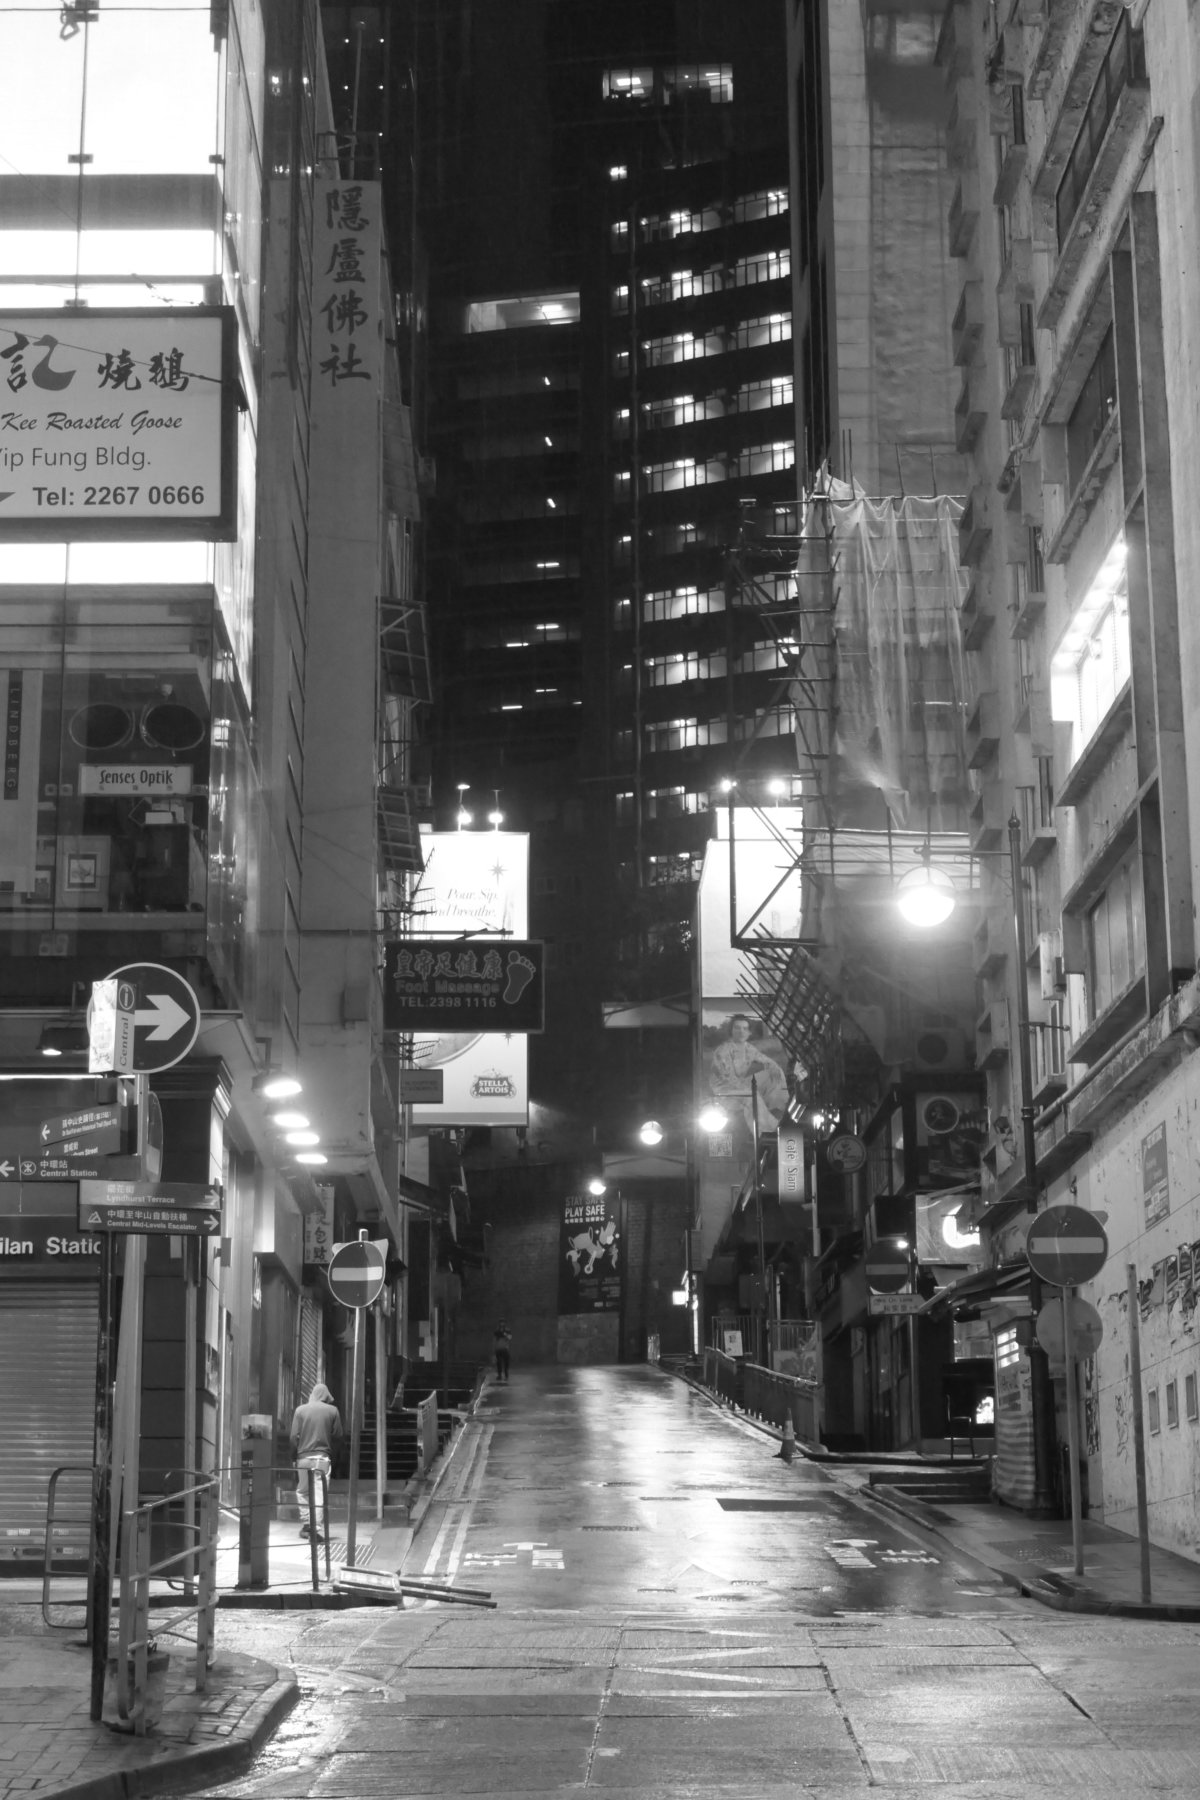 Sunday, 5 April 2020 would have been the end of the scheduled Hong Kong Rugby 7's weekend, and Lan Kwai Fong would have been heaving with thousands of people. This year, Central streets were deserted due to the imposition of social isolation measures and cancellation of public events. (circa 10.30pm, d'Aguilar Street, Central, Hong Kong, 5 April 2020. Photo: John Batten)